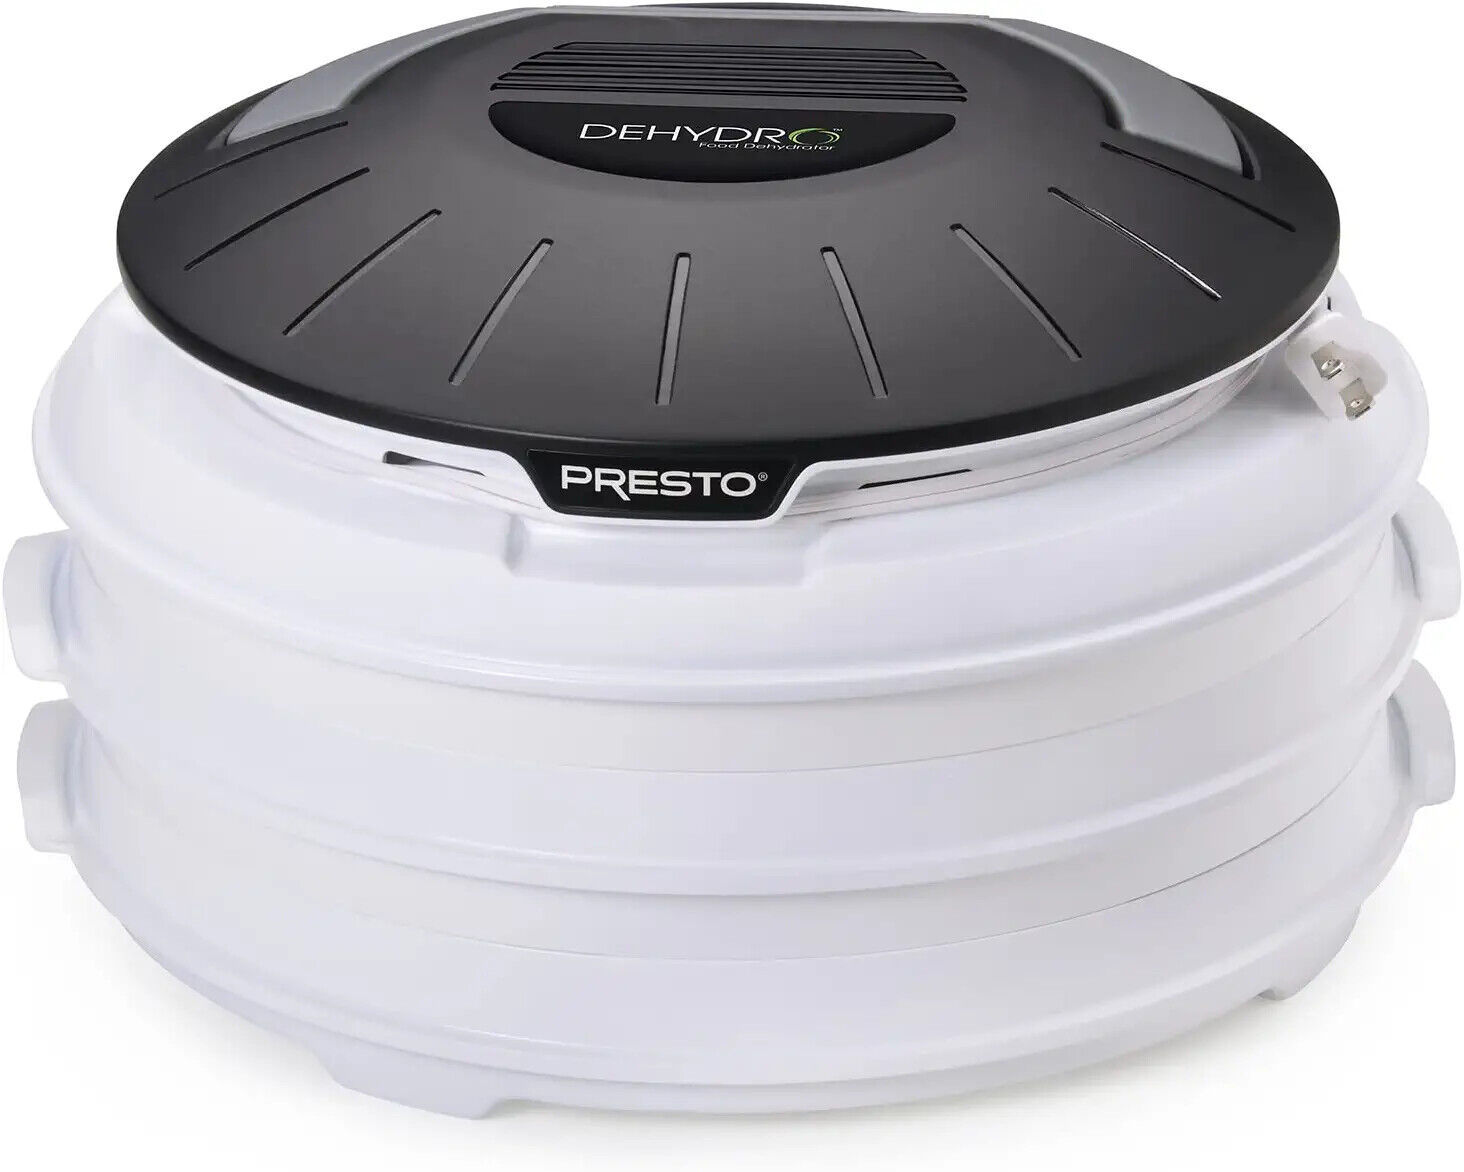 Primary image for Presto 06300 Dehydro Electric Food Dehydrator, Standard 4 trays with manual